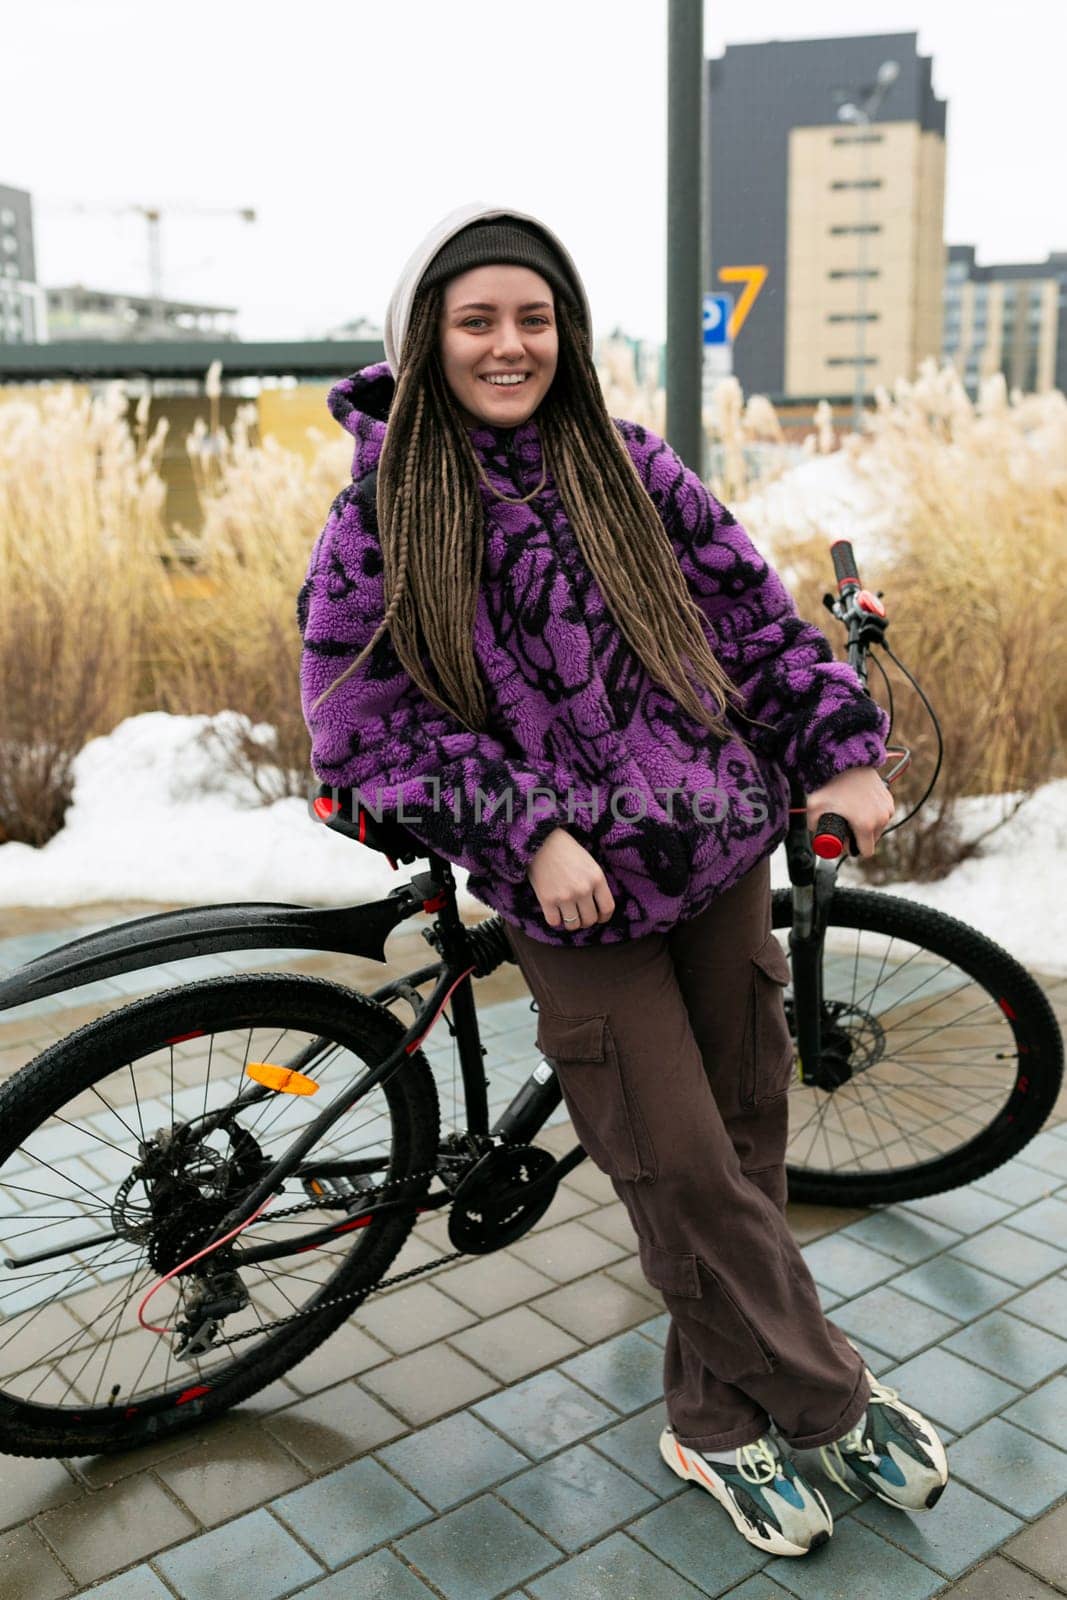 Cute young woman with piercing and dreadlocks rides a bicycle in winter.